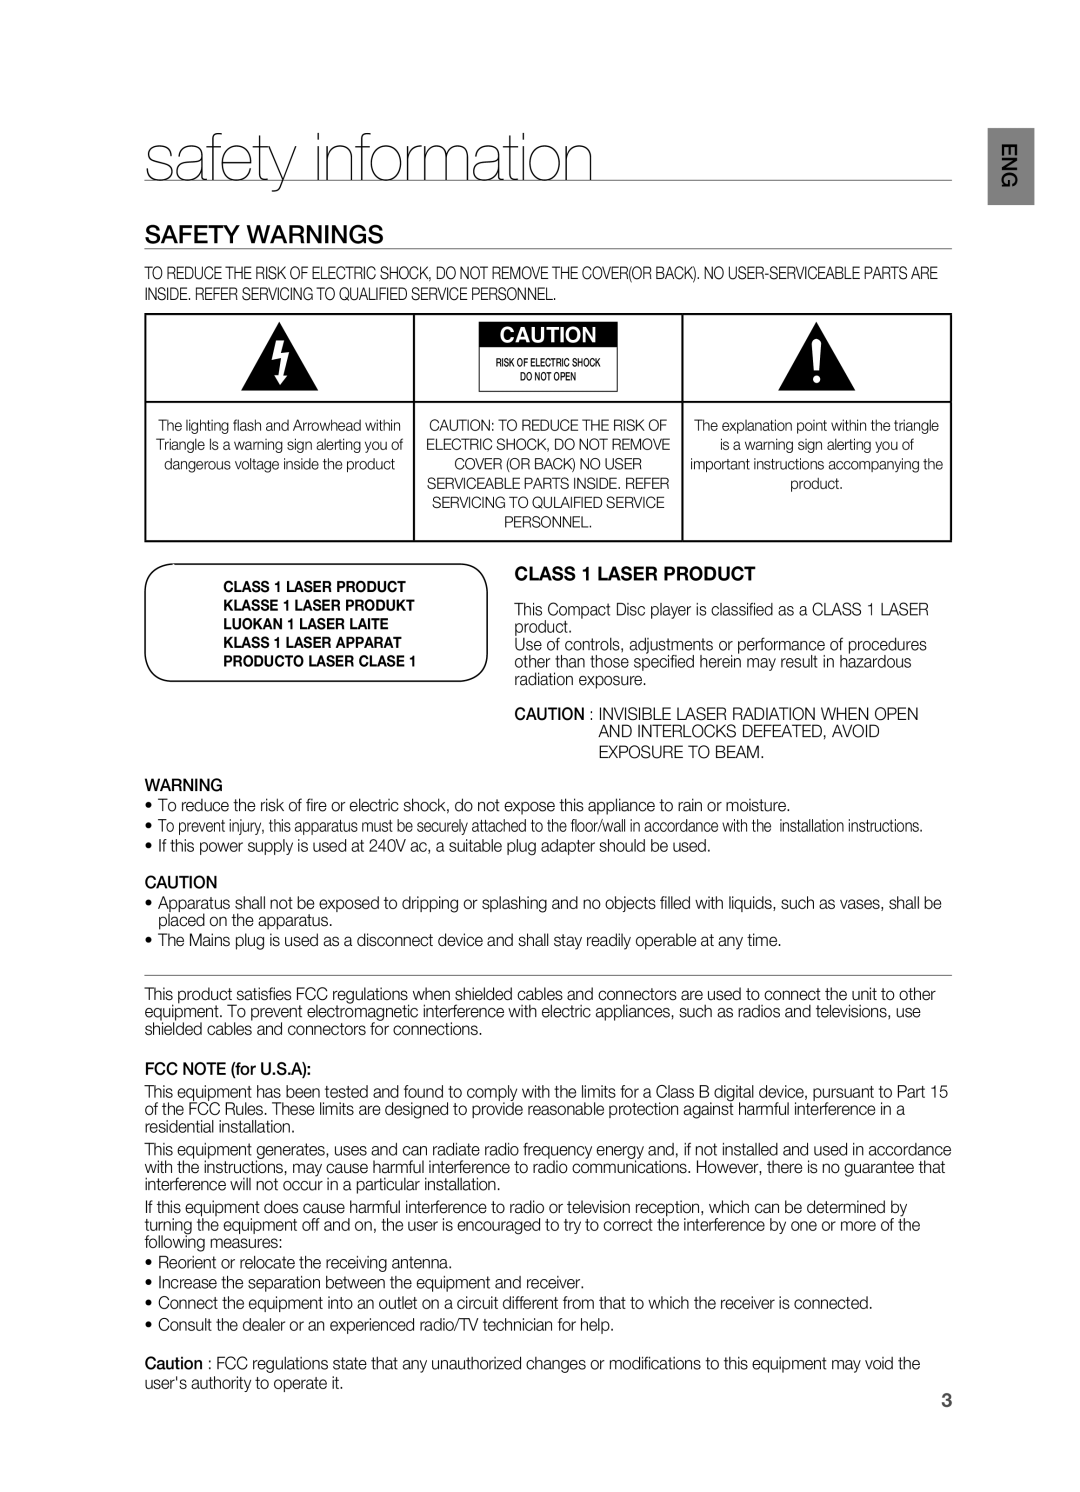 Sony HT-X810 user manual safety information, Safety Warnings, CLASS 1 LASER PRODUCT 